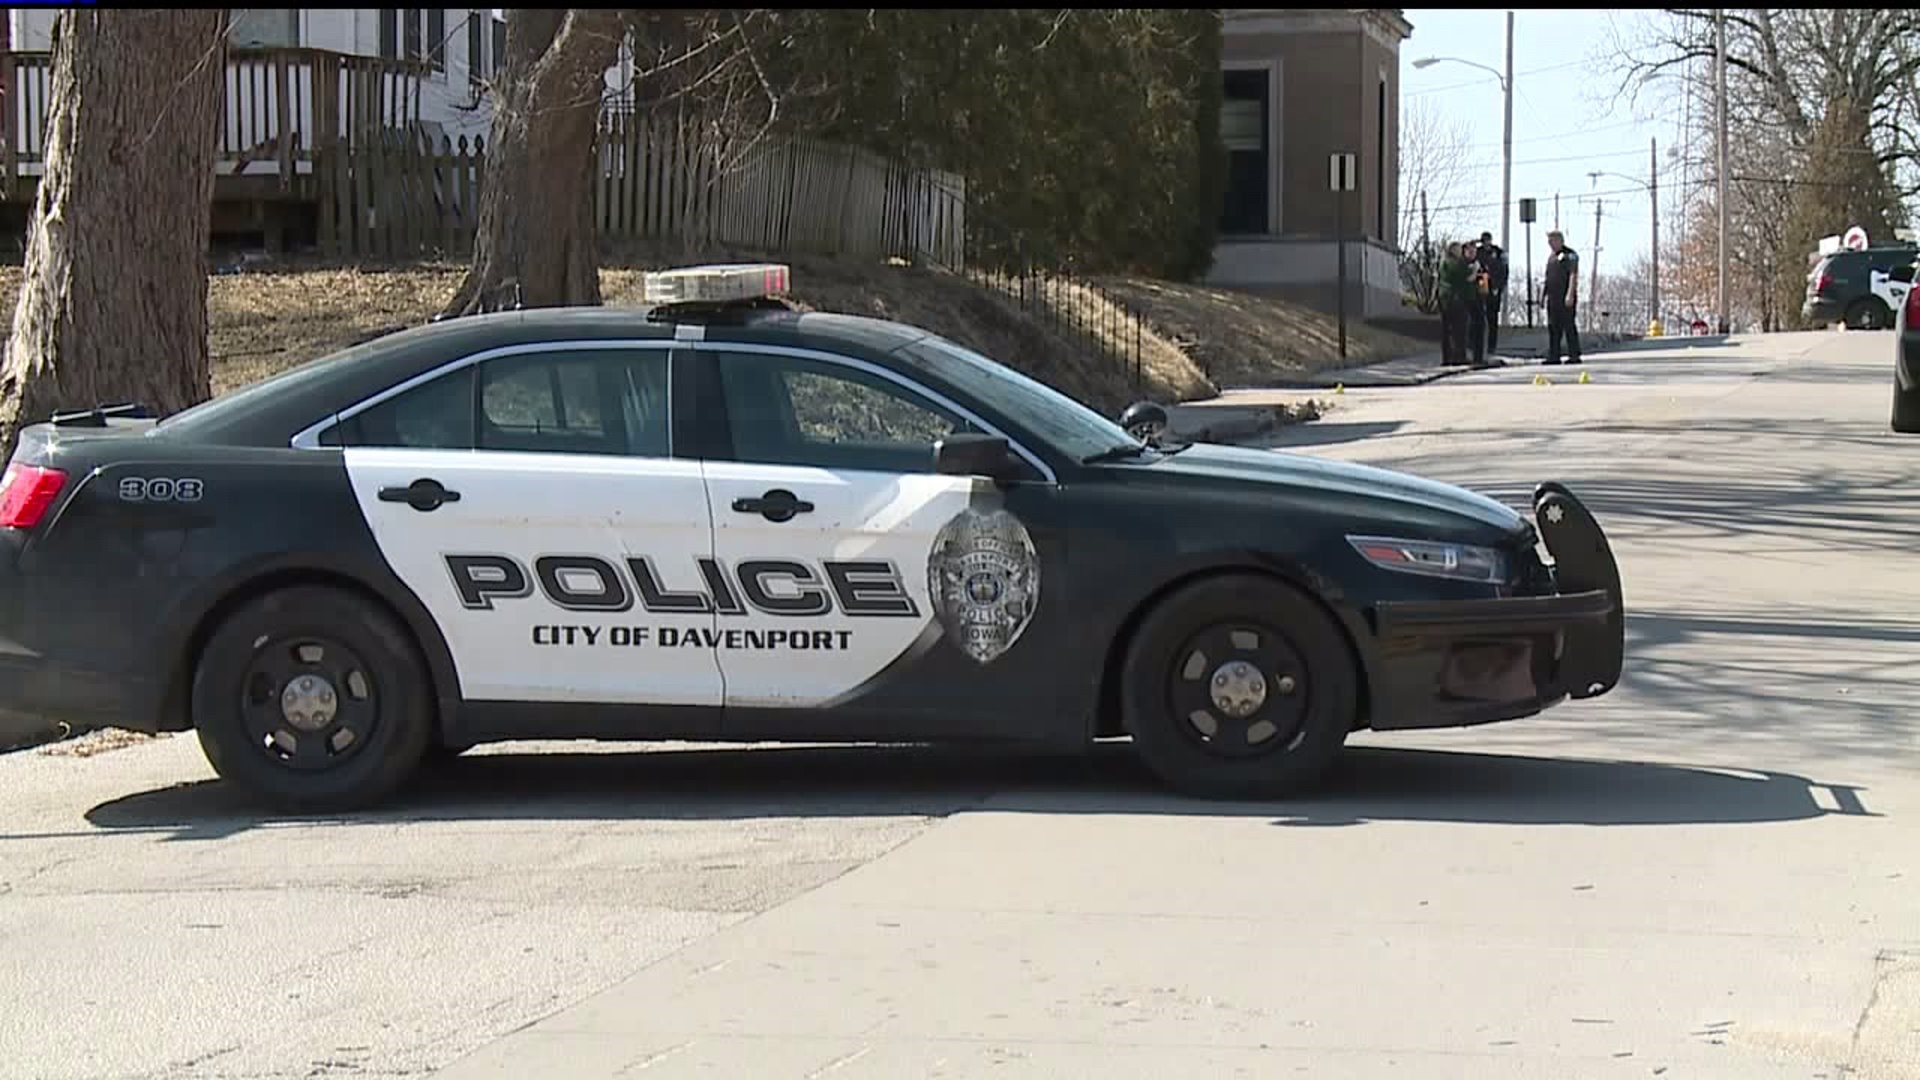 3 shots fired incidents in Davenport